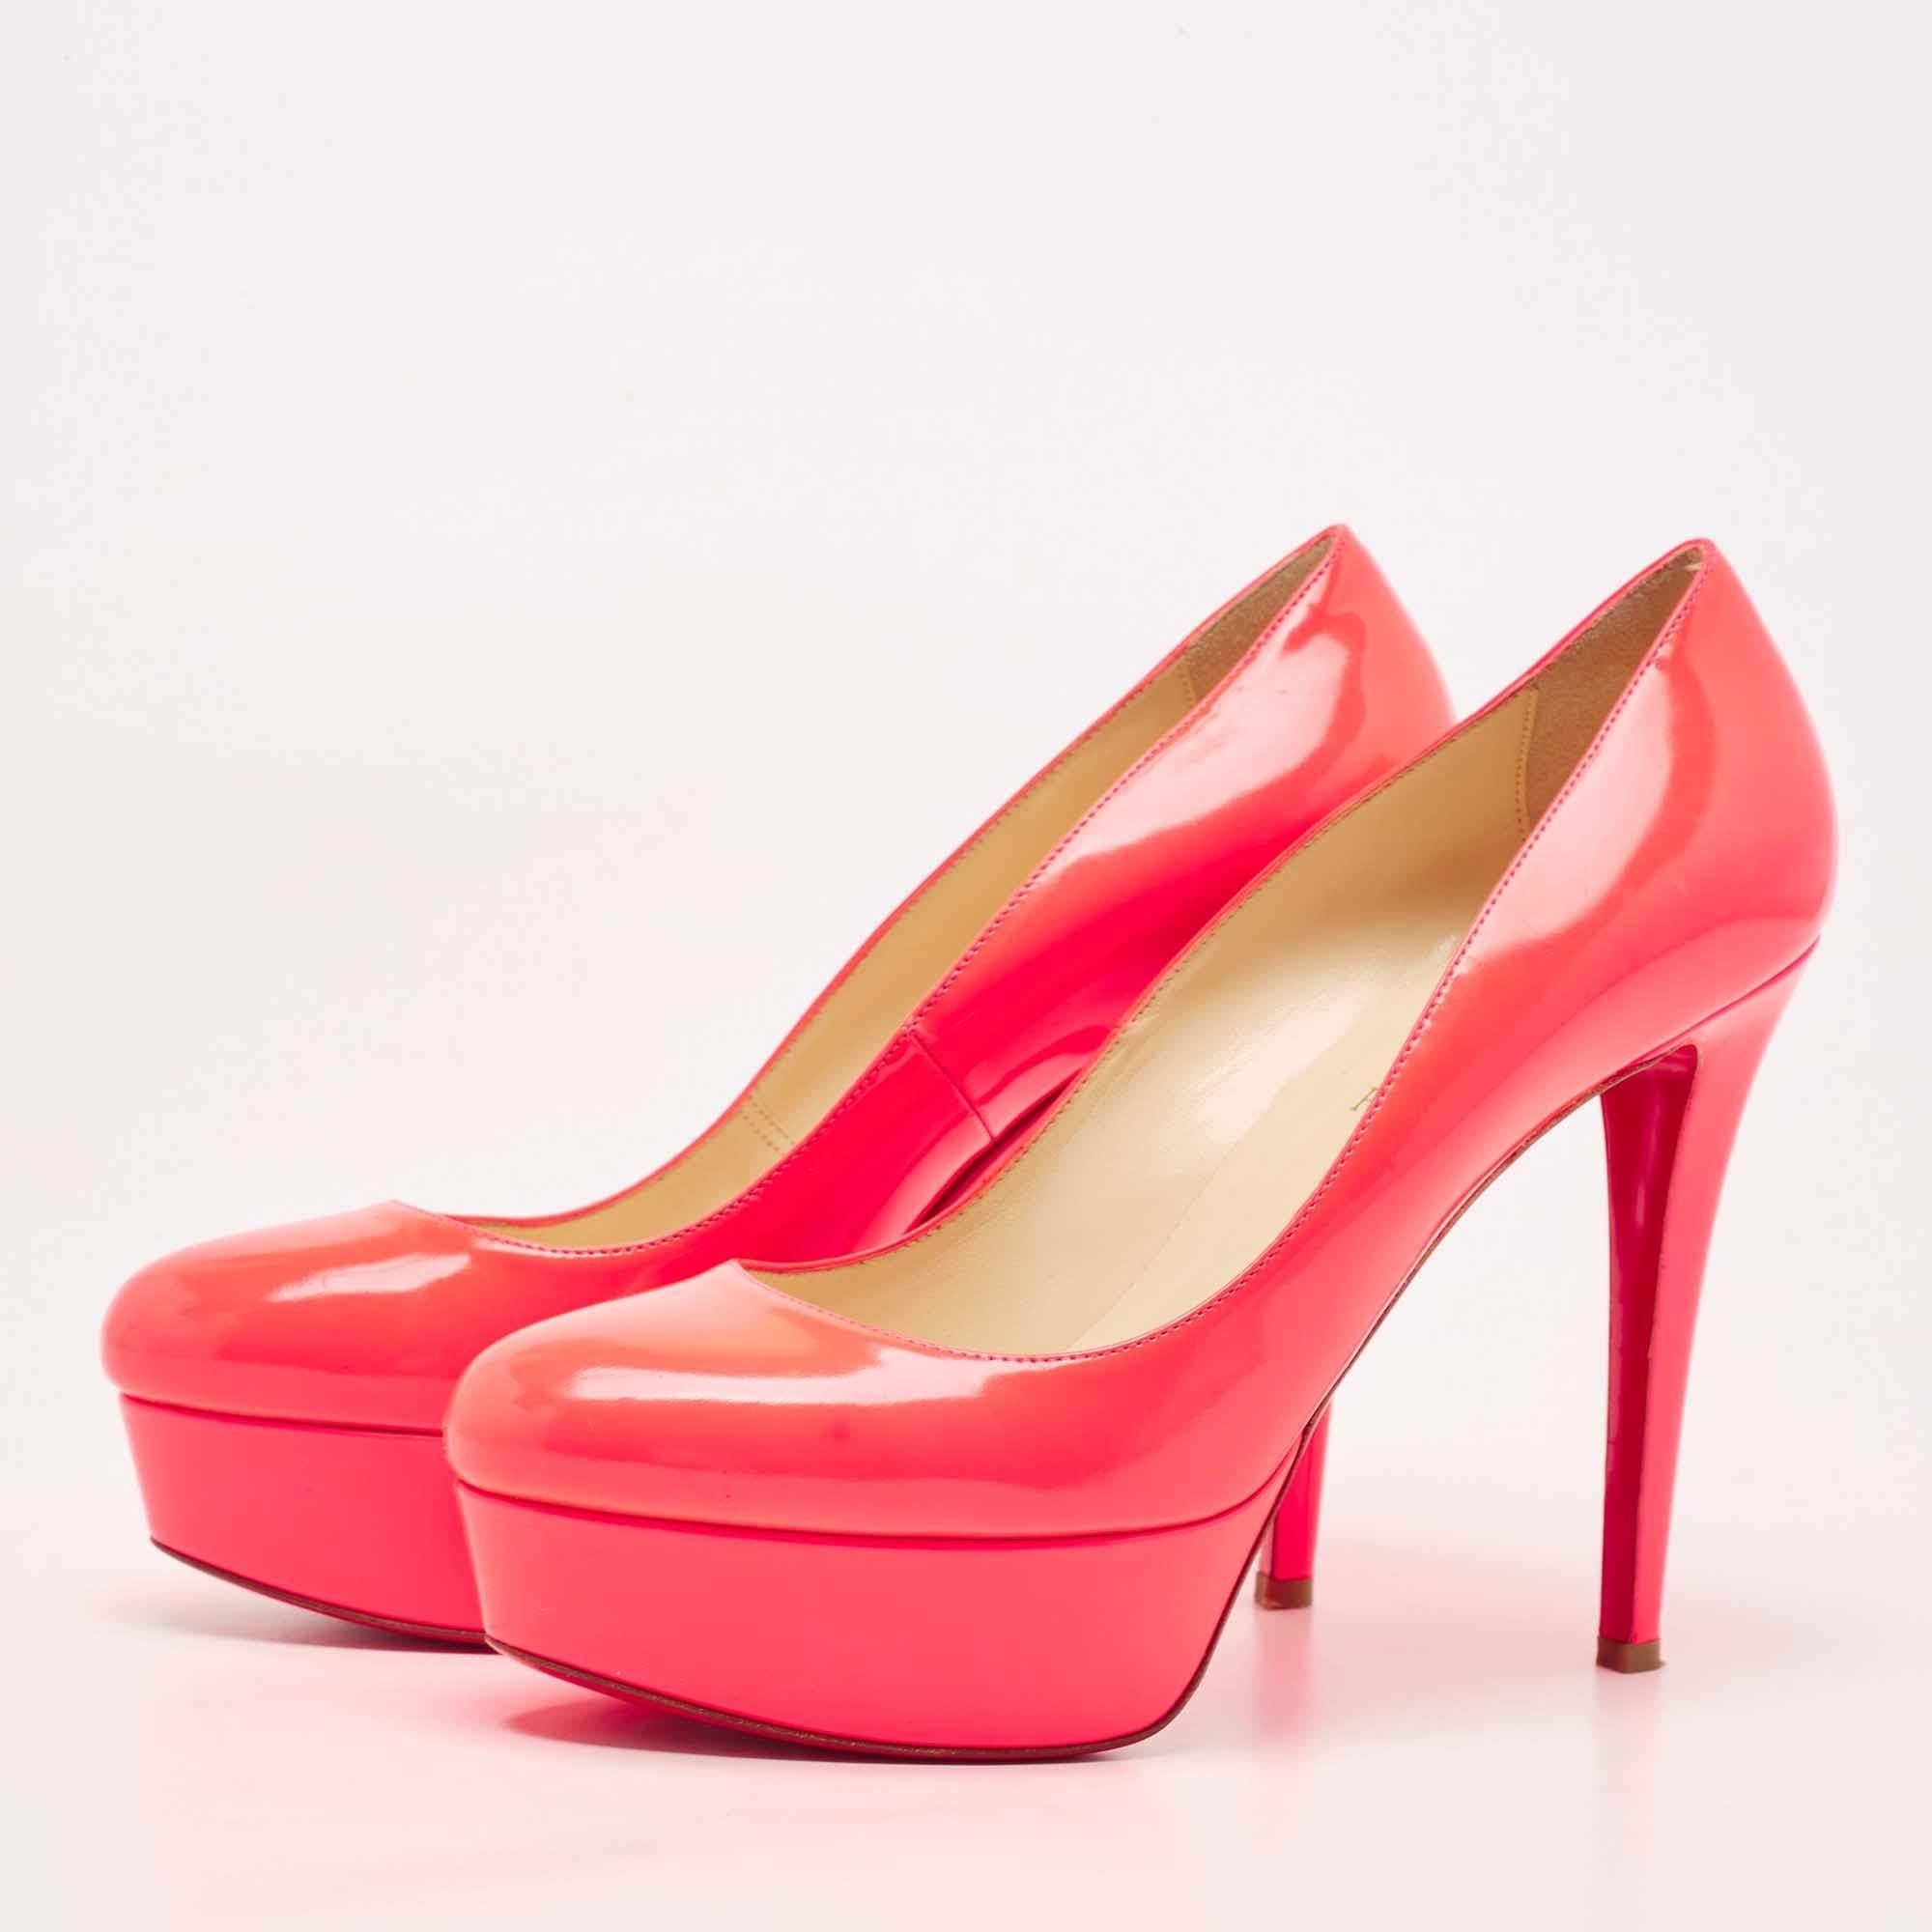 Christian Louboutin Neon Pink Leather Bianca Pumps Size 39.5 In Good Condition For Sale In Dubai, Al Qouz 2